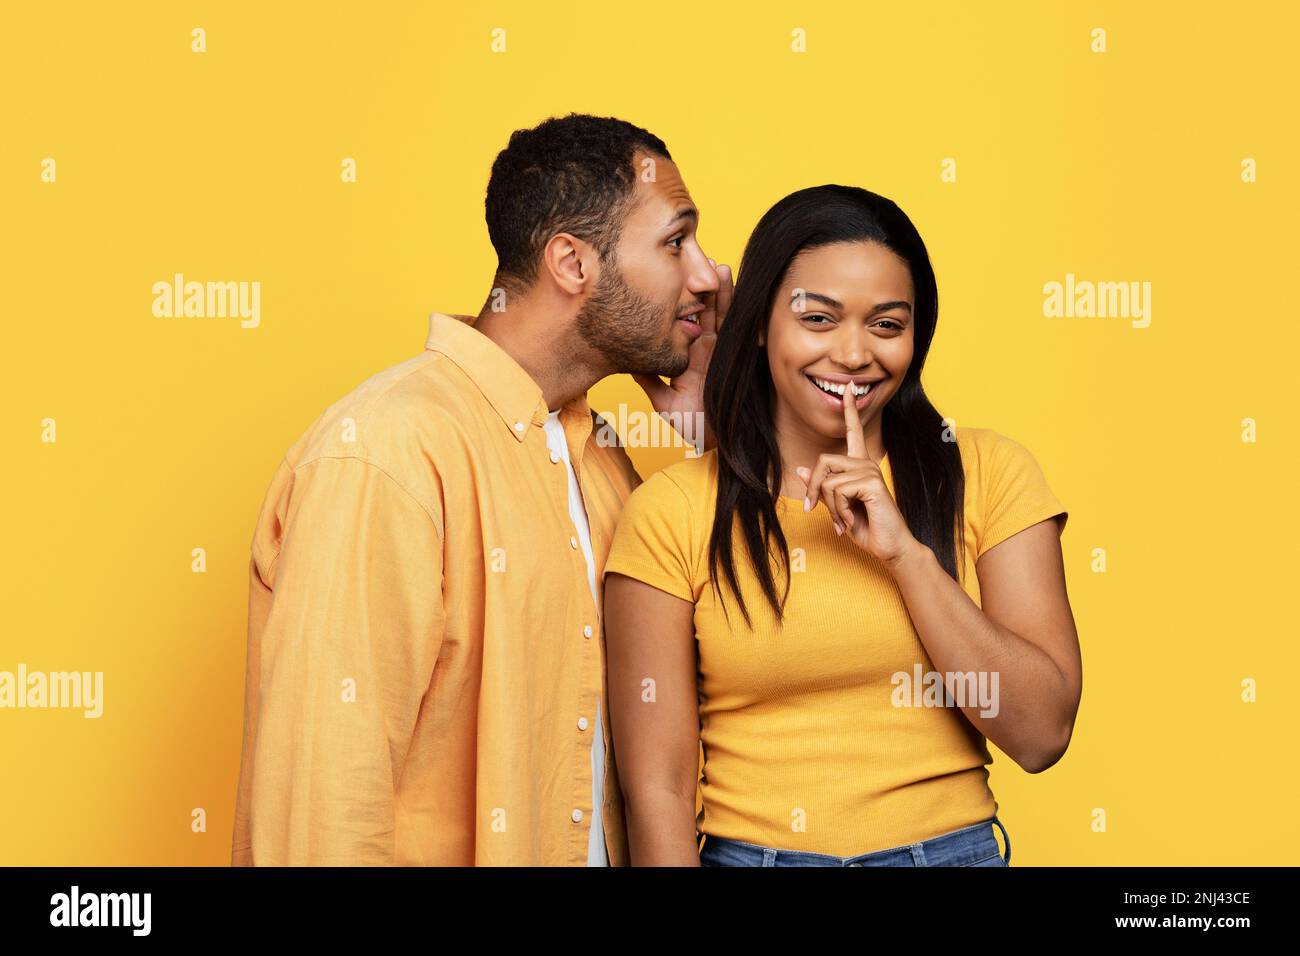 Smiling young african american male whispers to lady ear, female puts finger to lips, making secret gesture Stock Photo